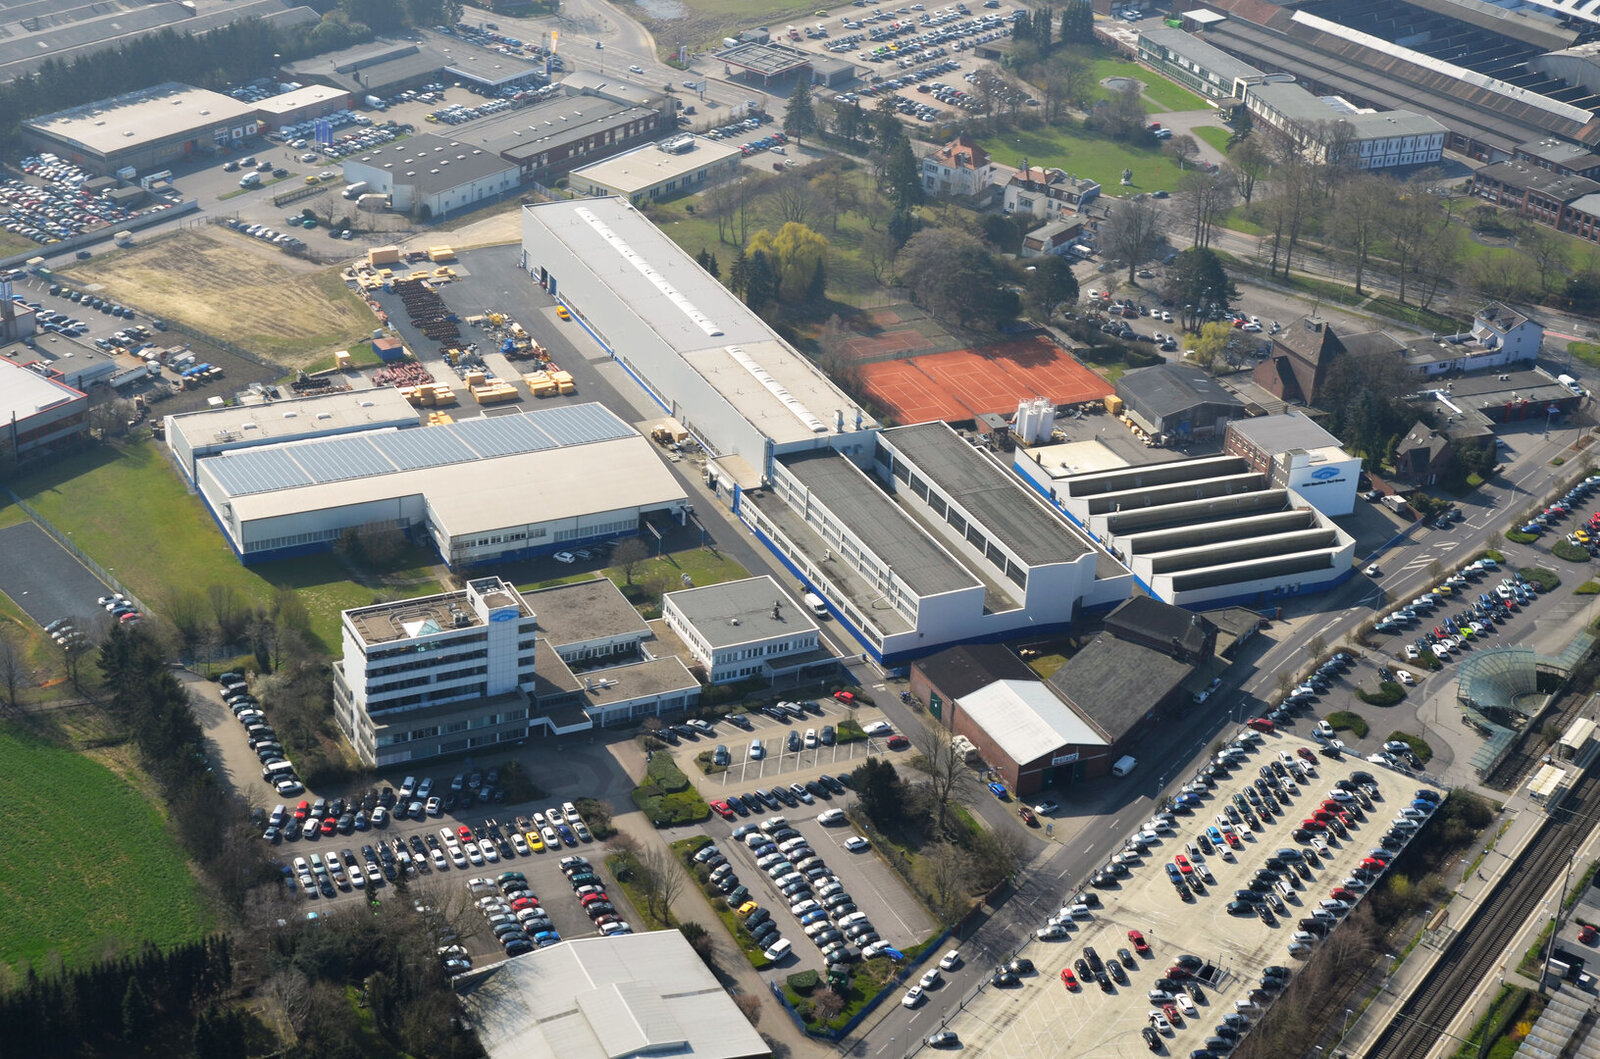 Here you can see the HEGENSCHEIDT-MFD factory